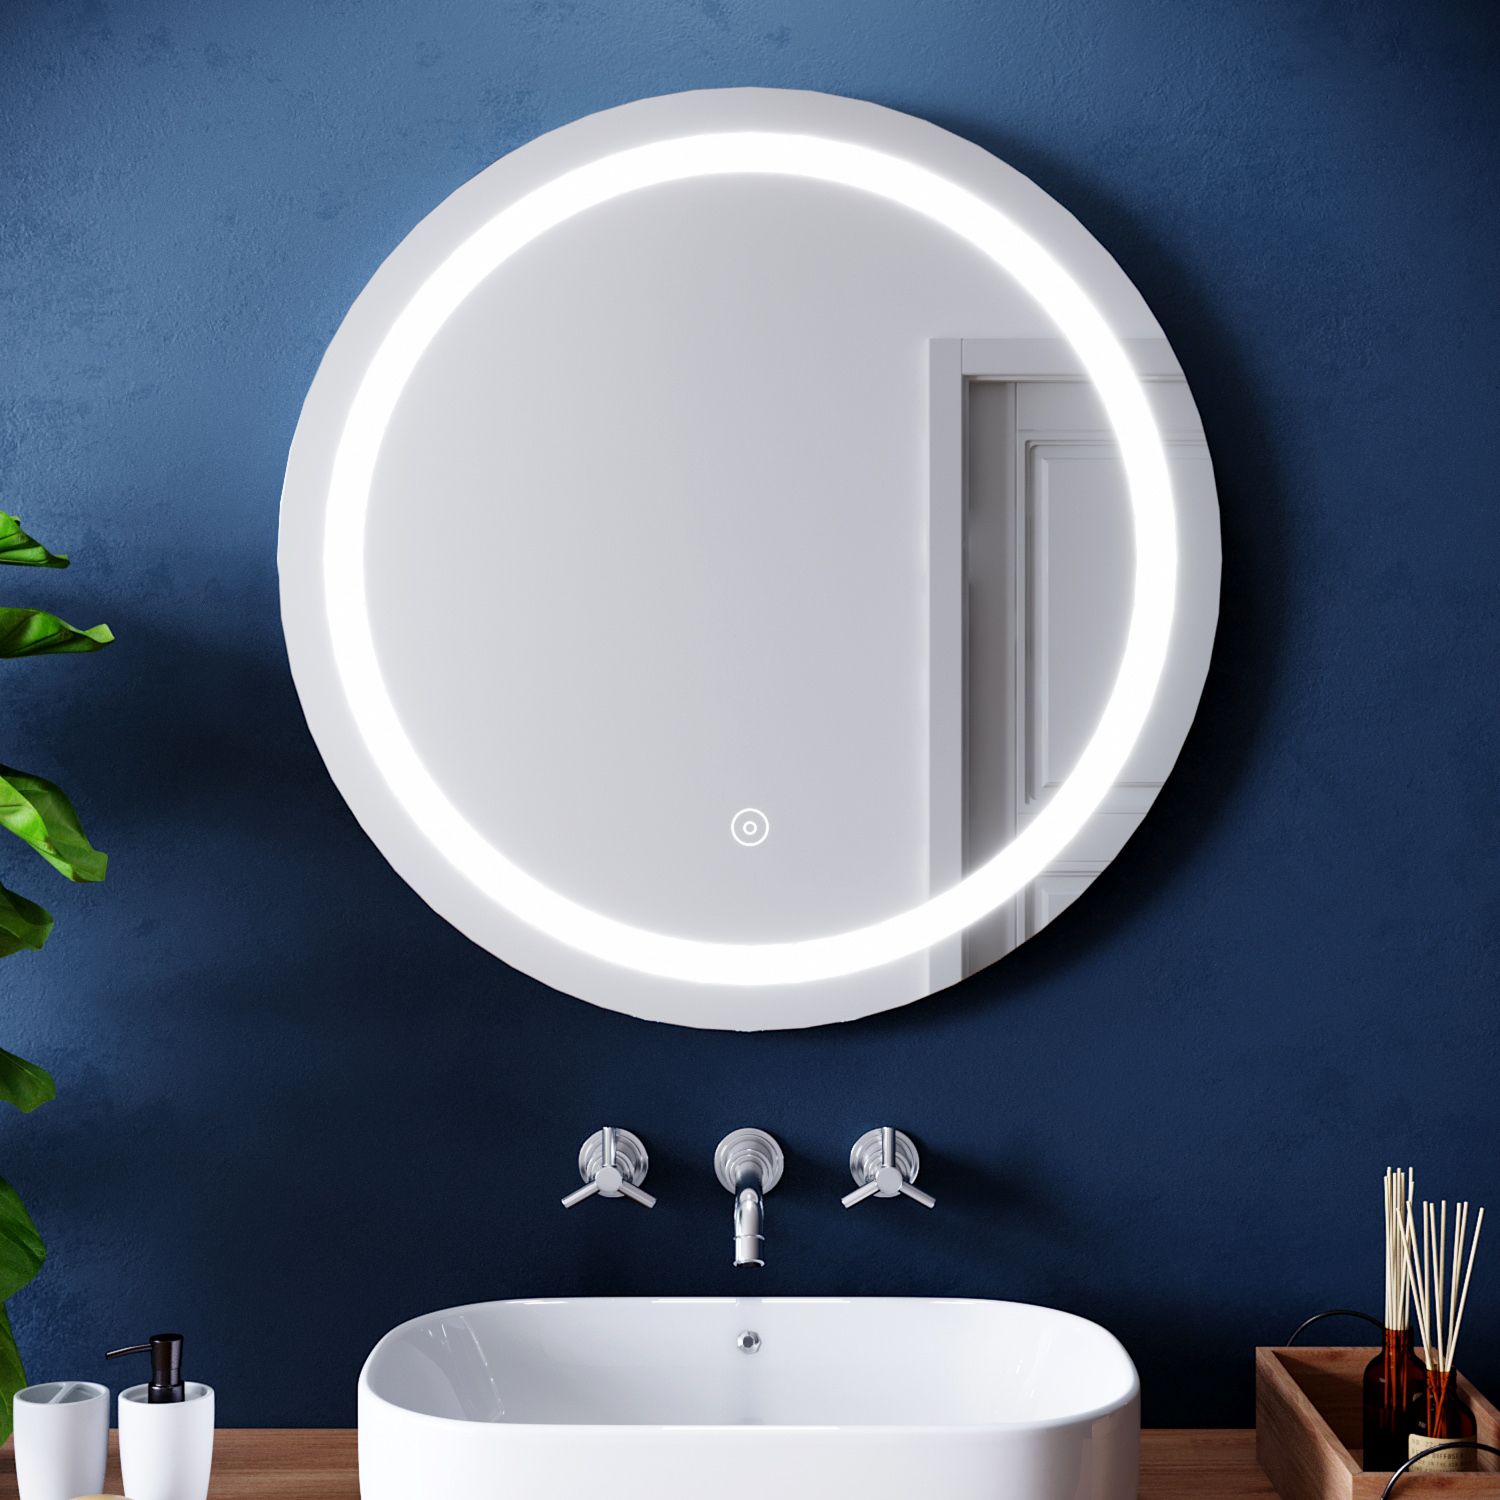 Round Led Bathroom Mirror Demister With White Lights Anti Fog Ip44 With Regard To Karn Vertical Round Resin Wall Mirrors (View 10 of 15)